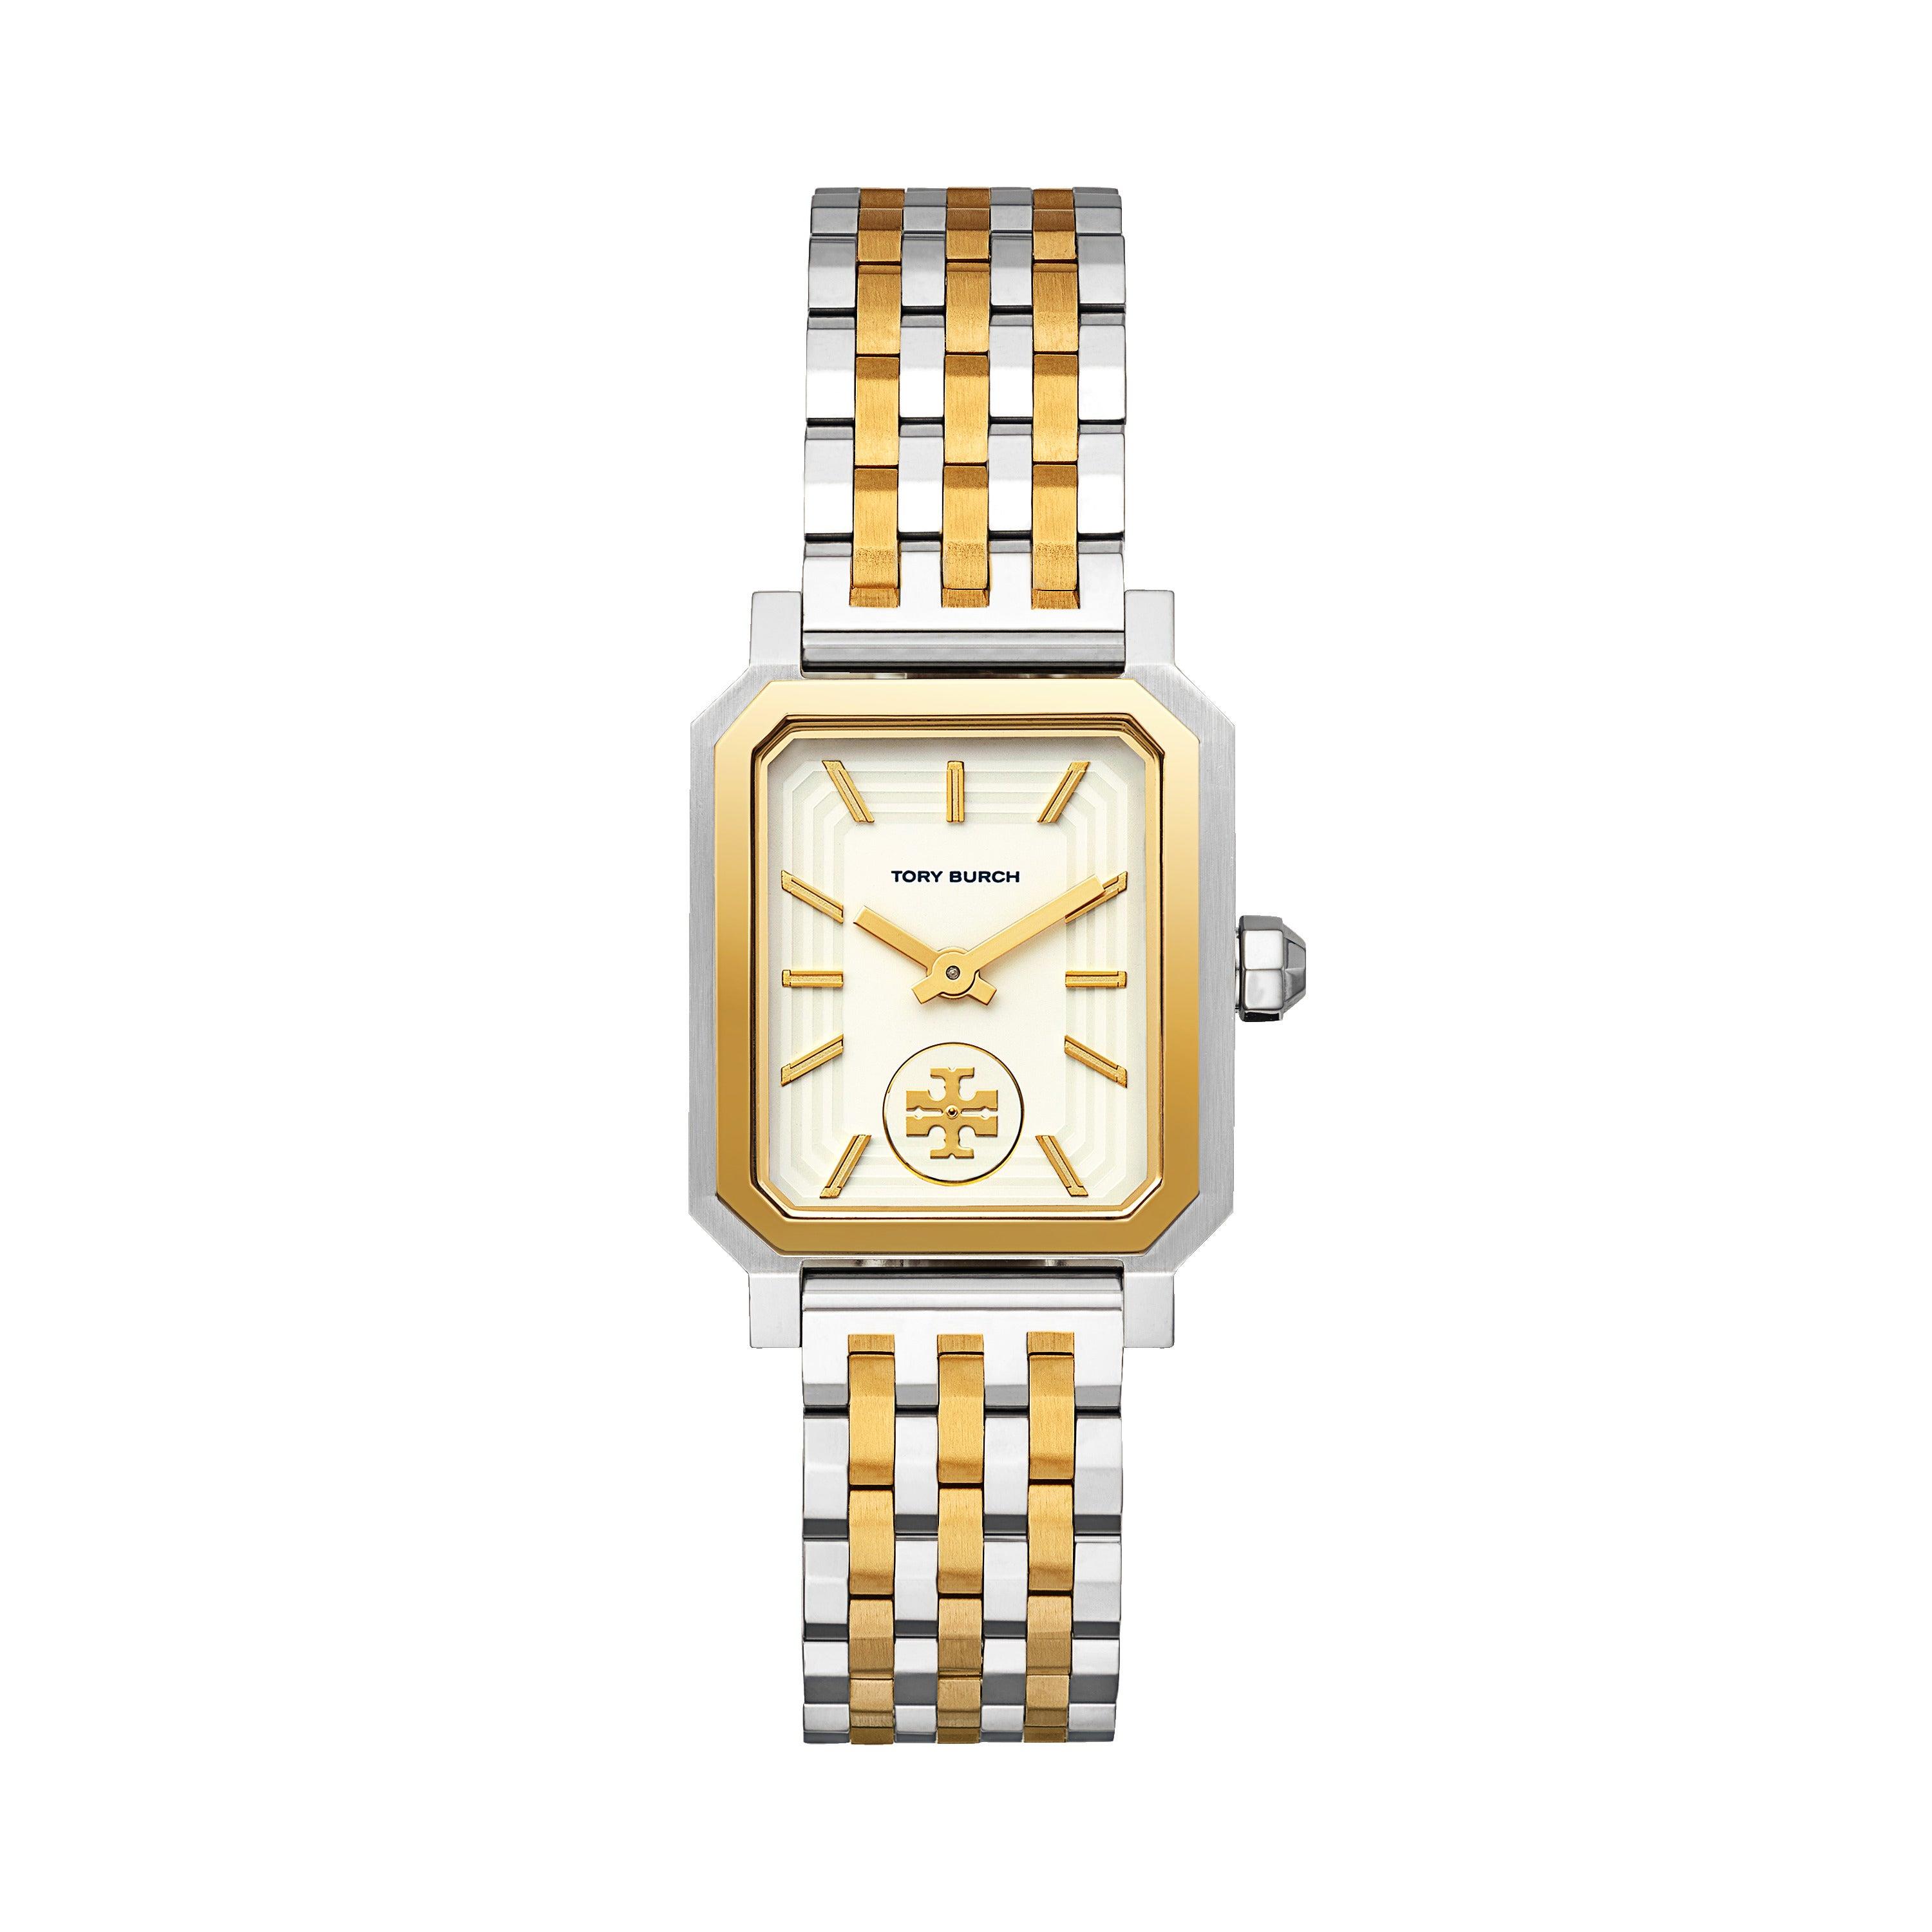 Tory Burch Clock Watch, Gold-Tone Stainless Steel